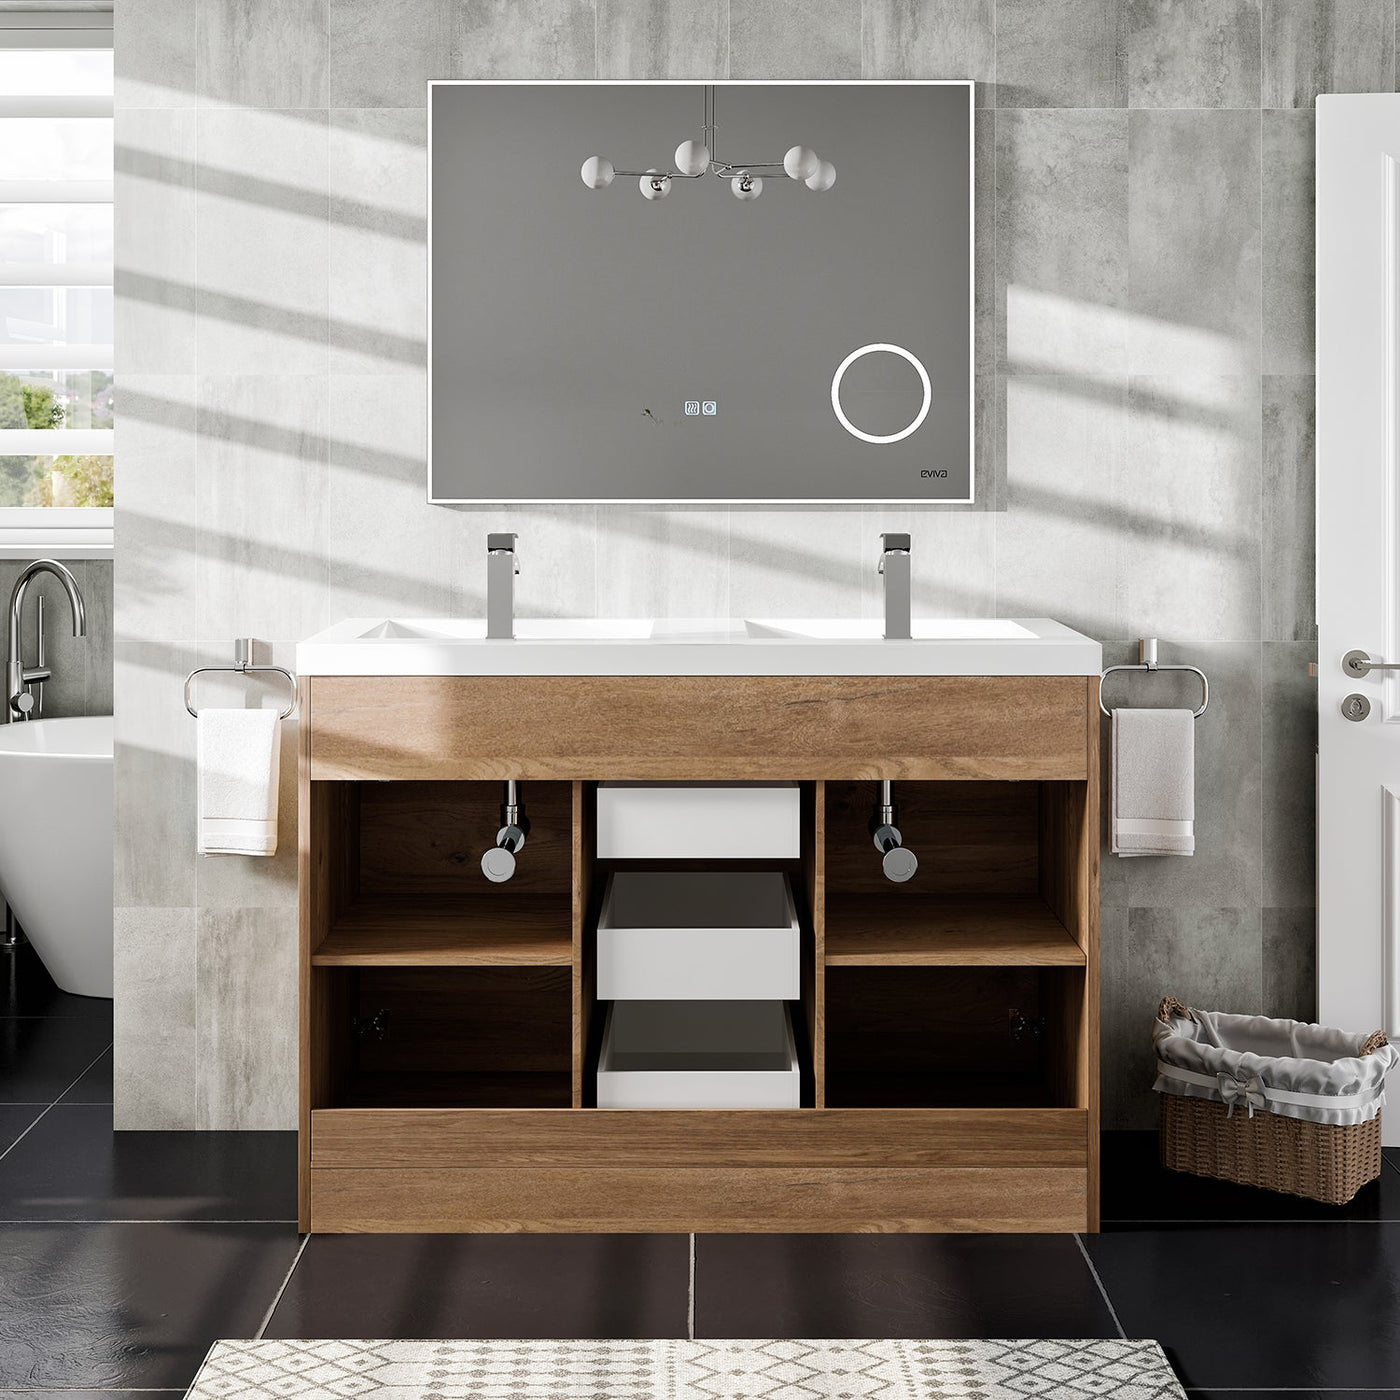 Lugano 48"W x 20"D Natural Oak Double Sink Bathroom Vanity with White Acrylic Countertop and Integrated Sinks